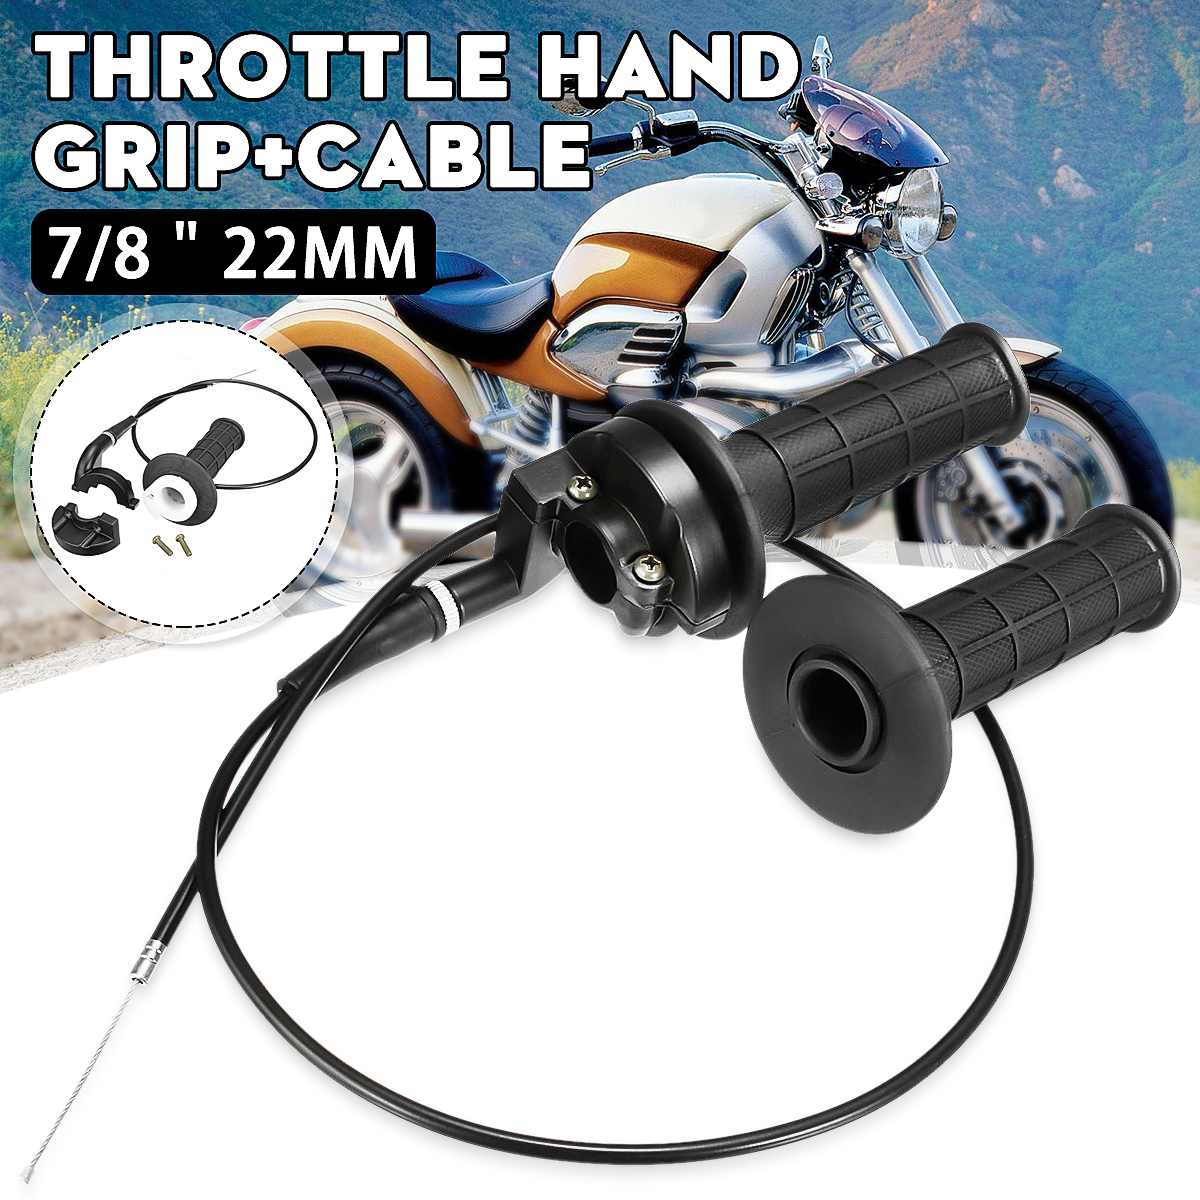 1 Pair Universal 7/8" 22mm Motorcycle Throttle Grips Handlebar Hand Grips with Wire Cable For Dirt Pit Bike ATV Scooter